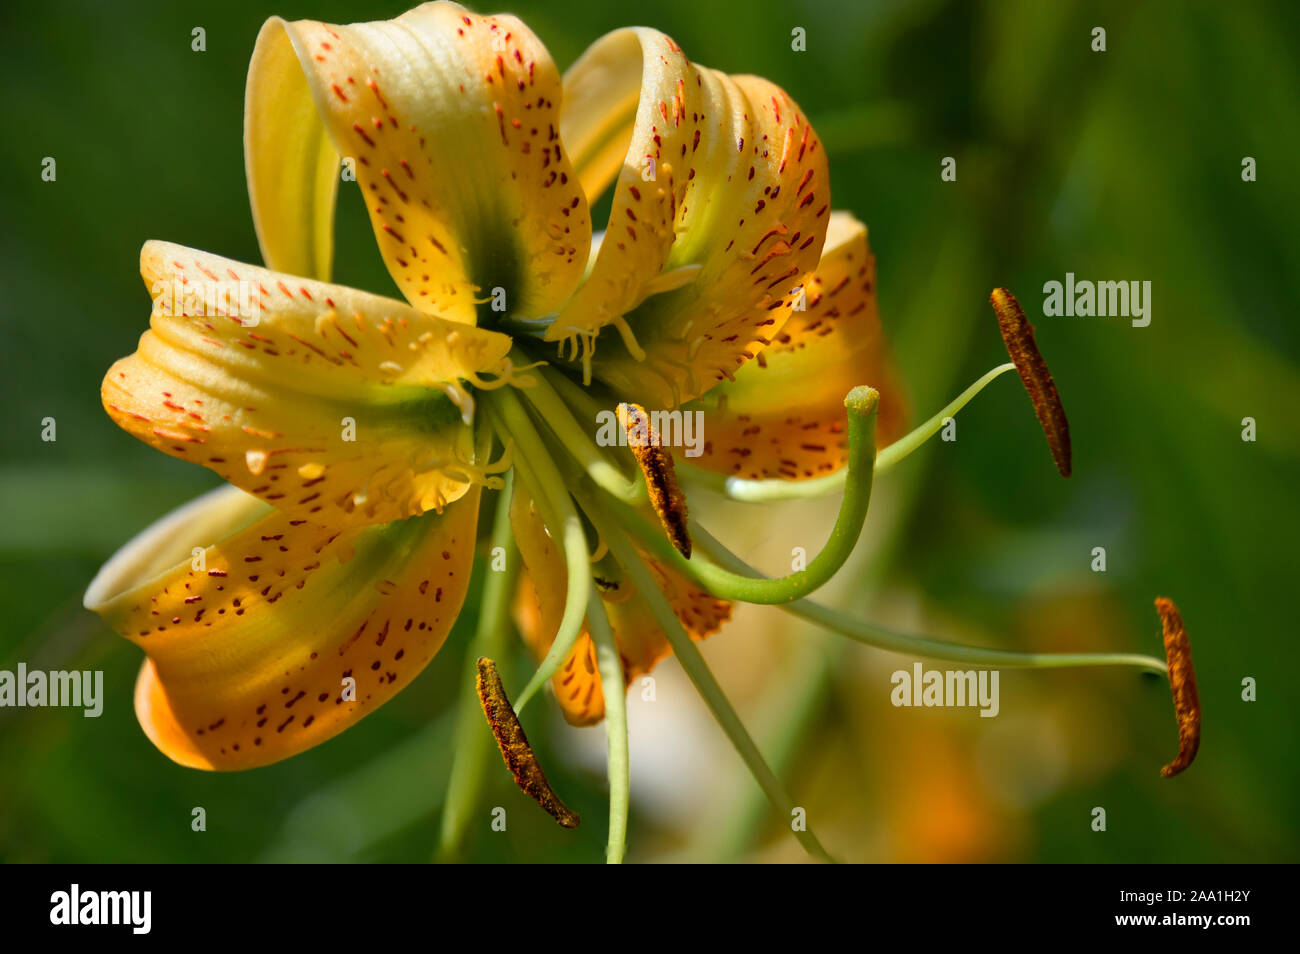 Tiger Lily or Lilium Henri photographed at the Botanical Gardens in New Mexico. Stock Photo